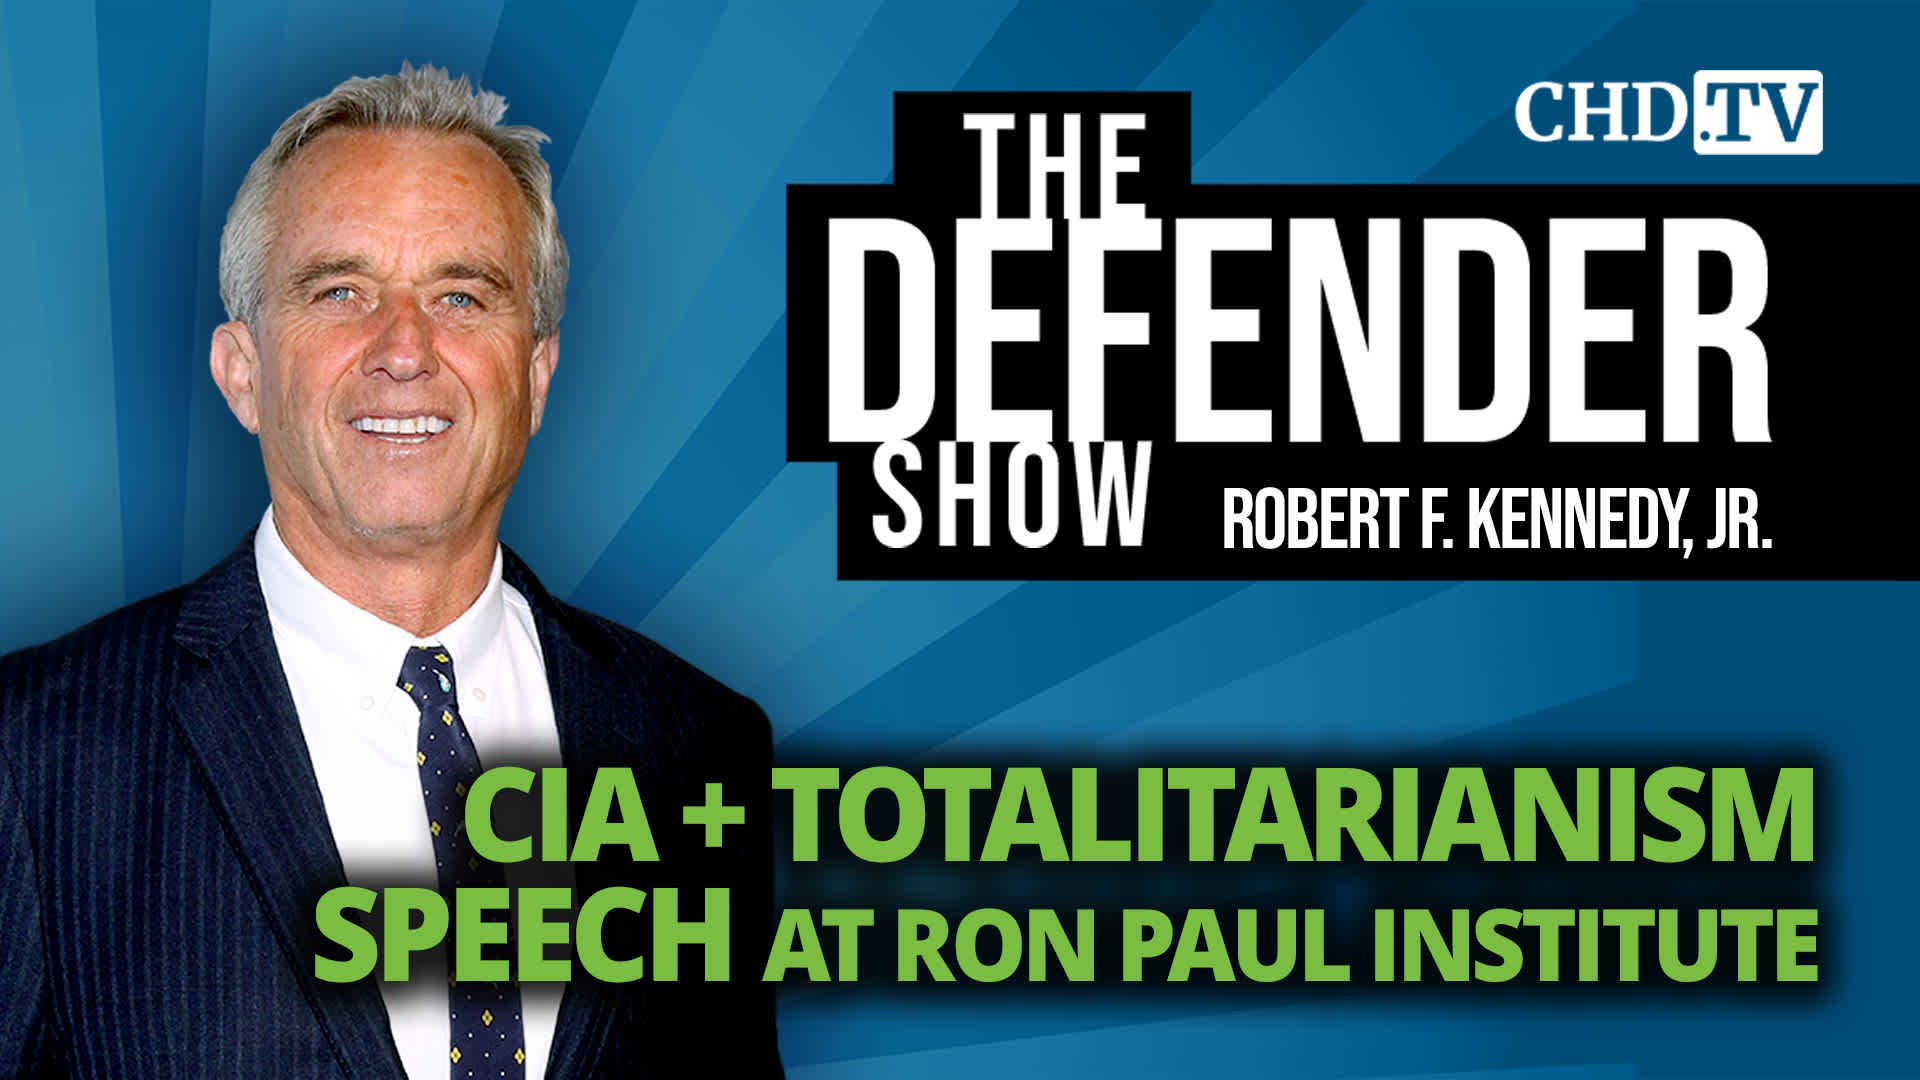 CIA and Totalitarianism Speech at Ron Paul Institute